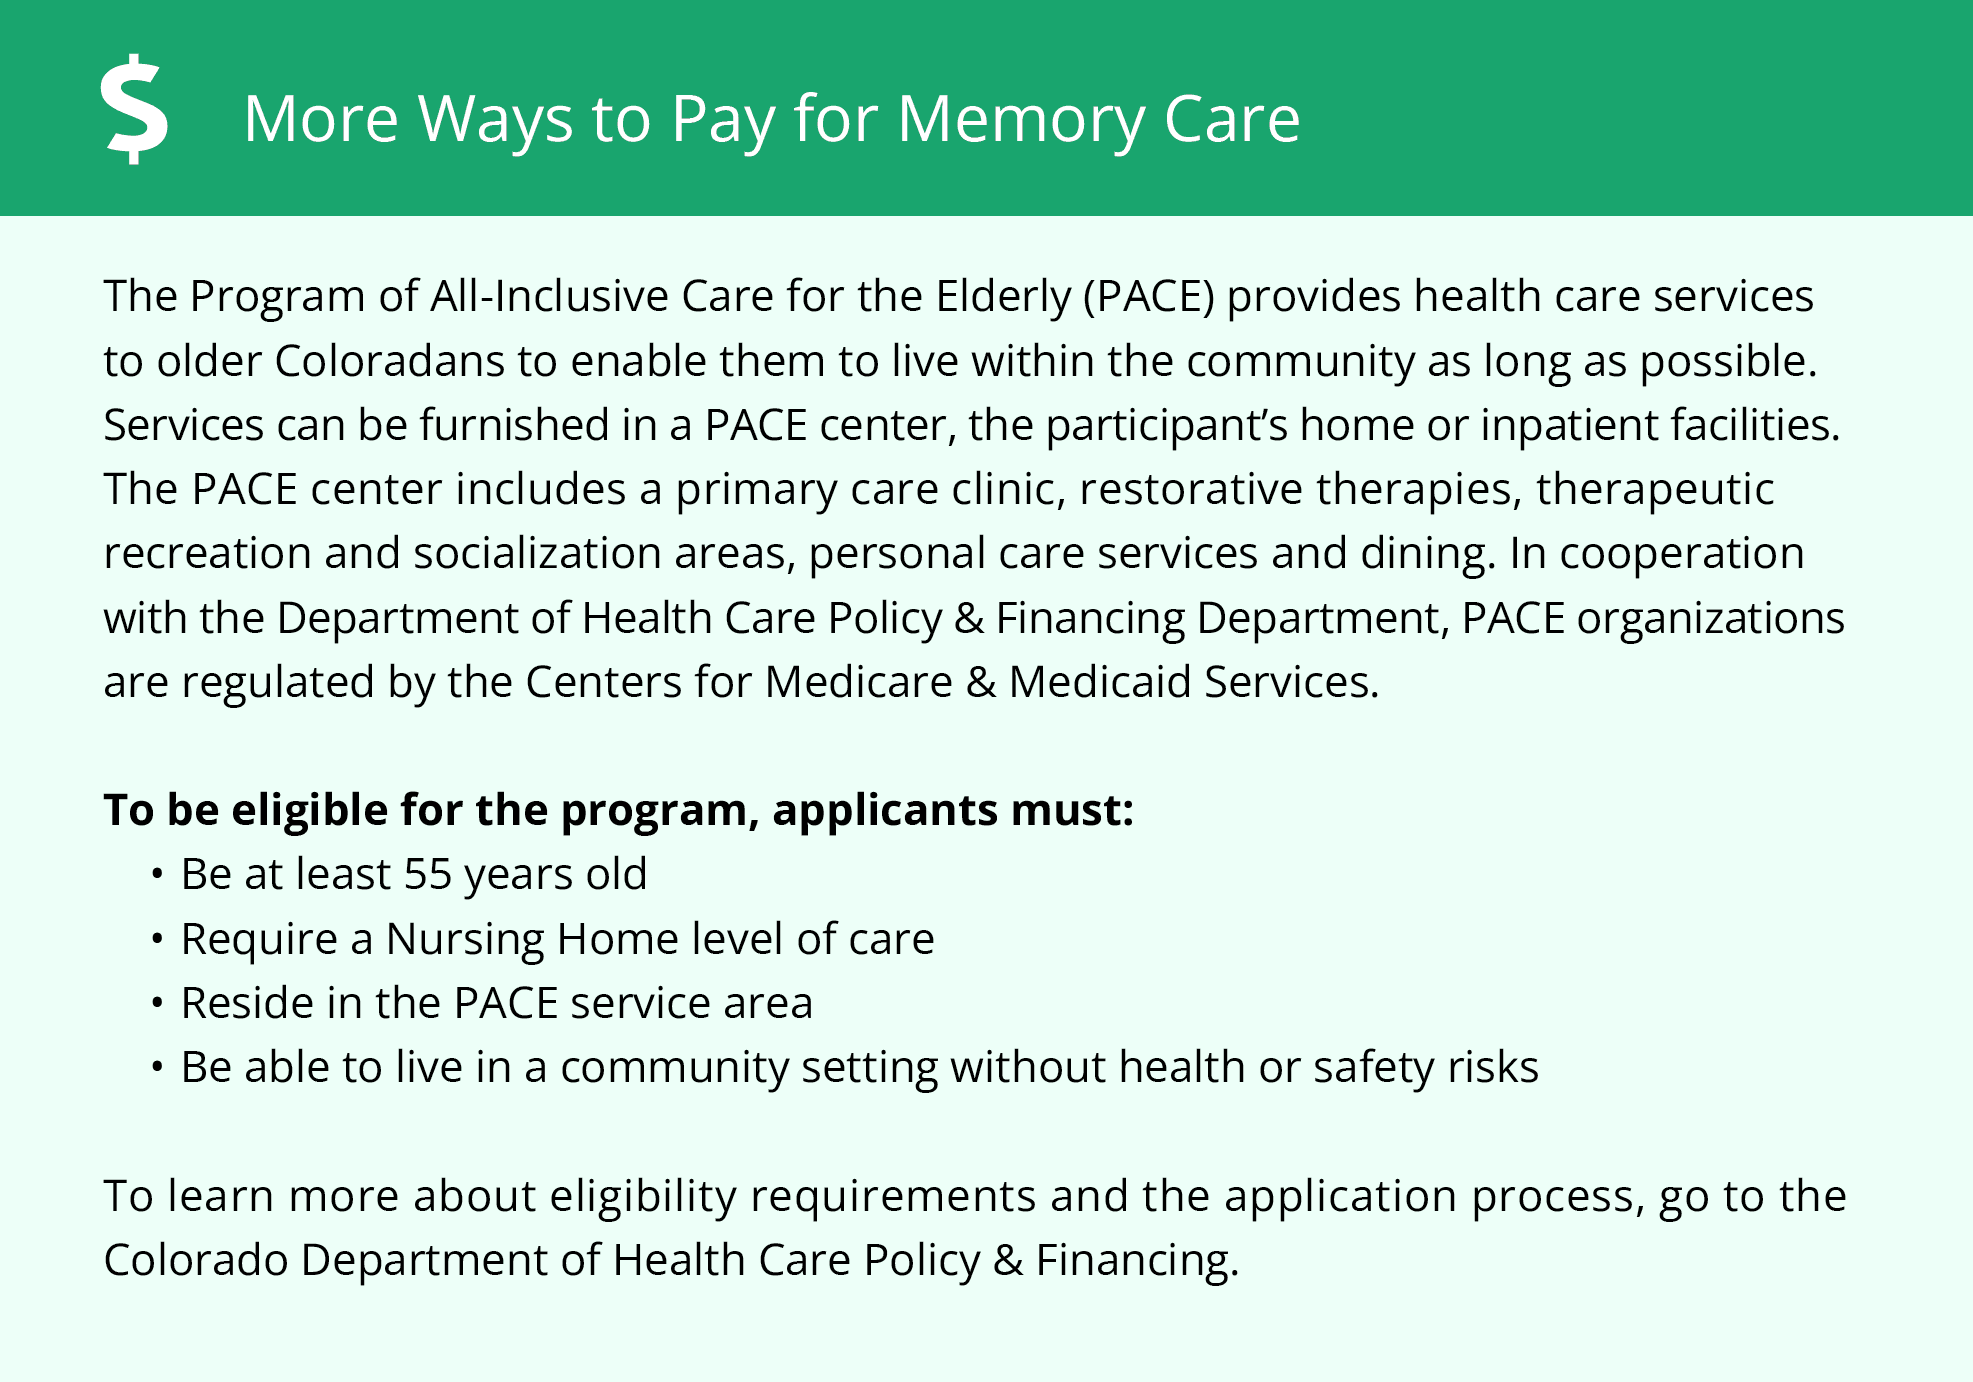 More ways to pay for memory care in CO